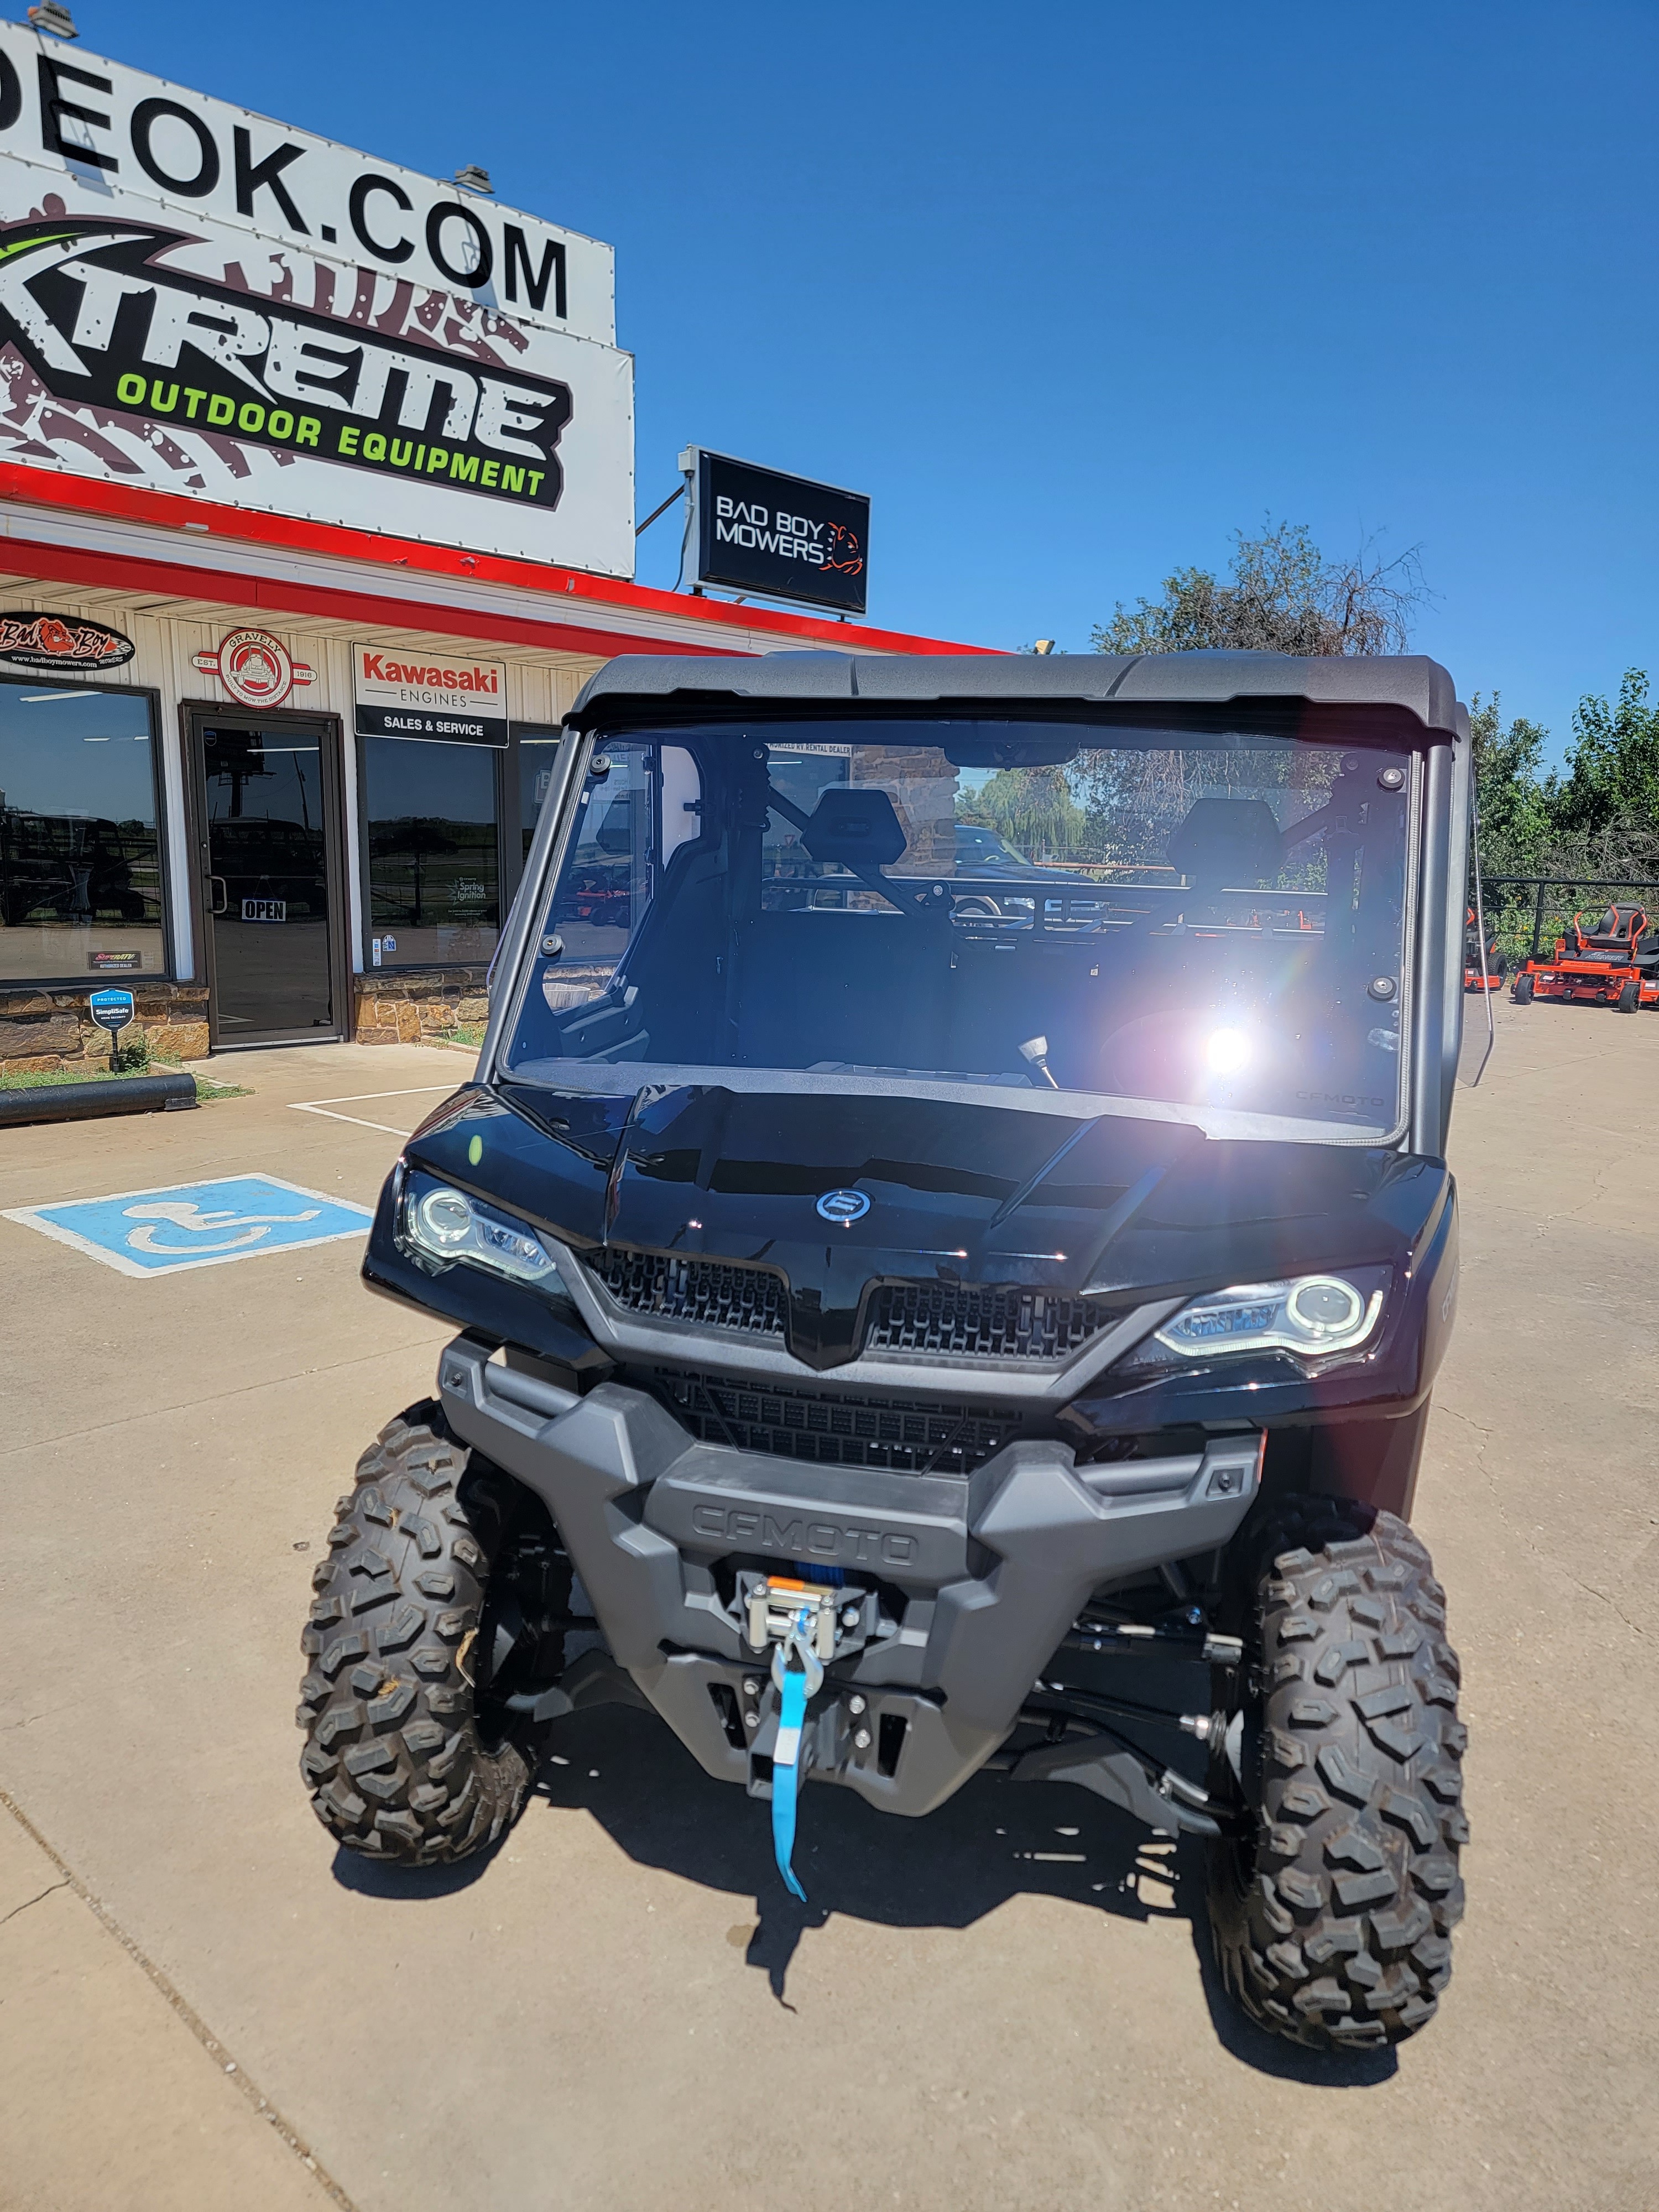 2023 CFMOTO UFORCE 1000 at Xtreme Outdoor Equipment